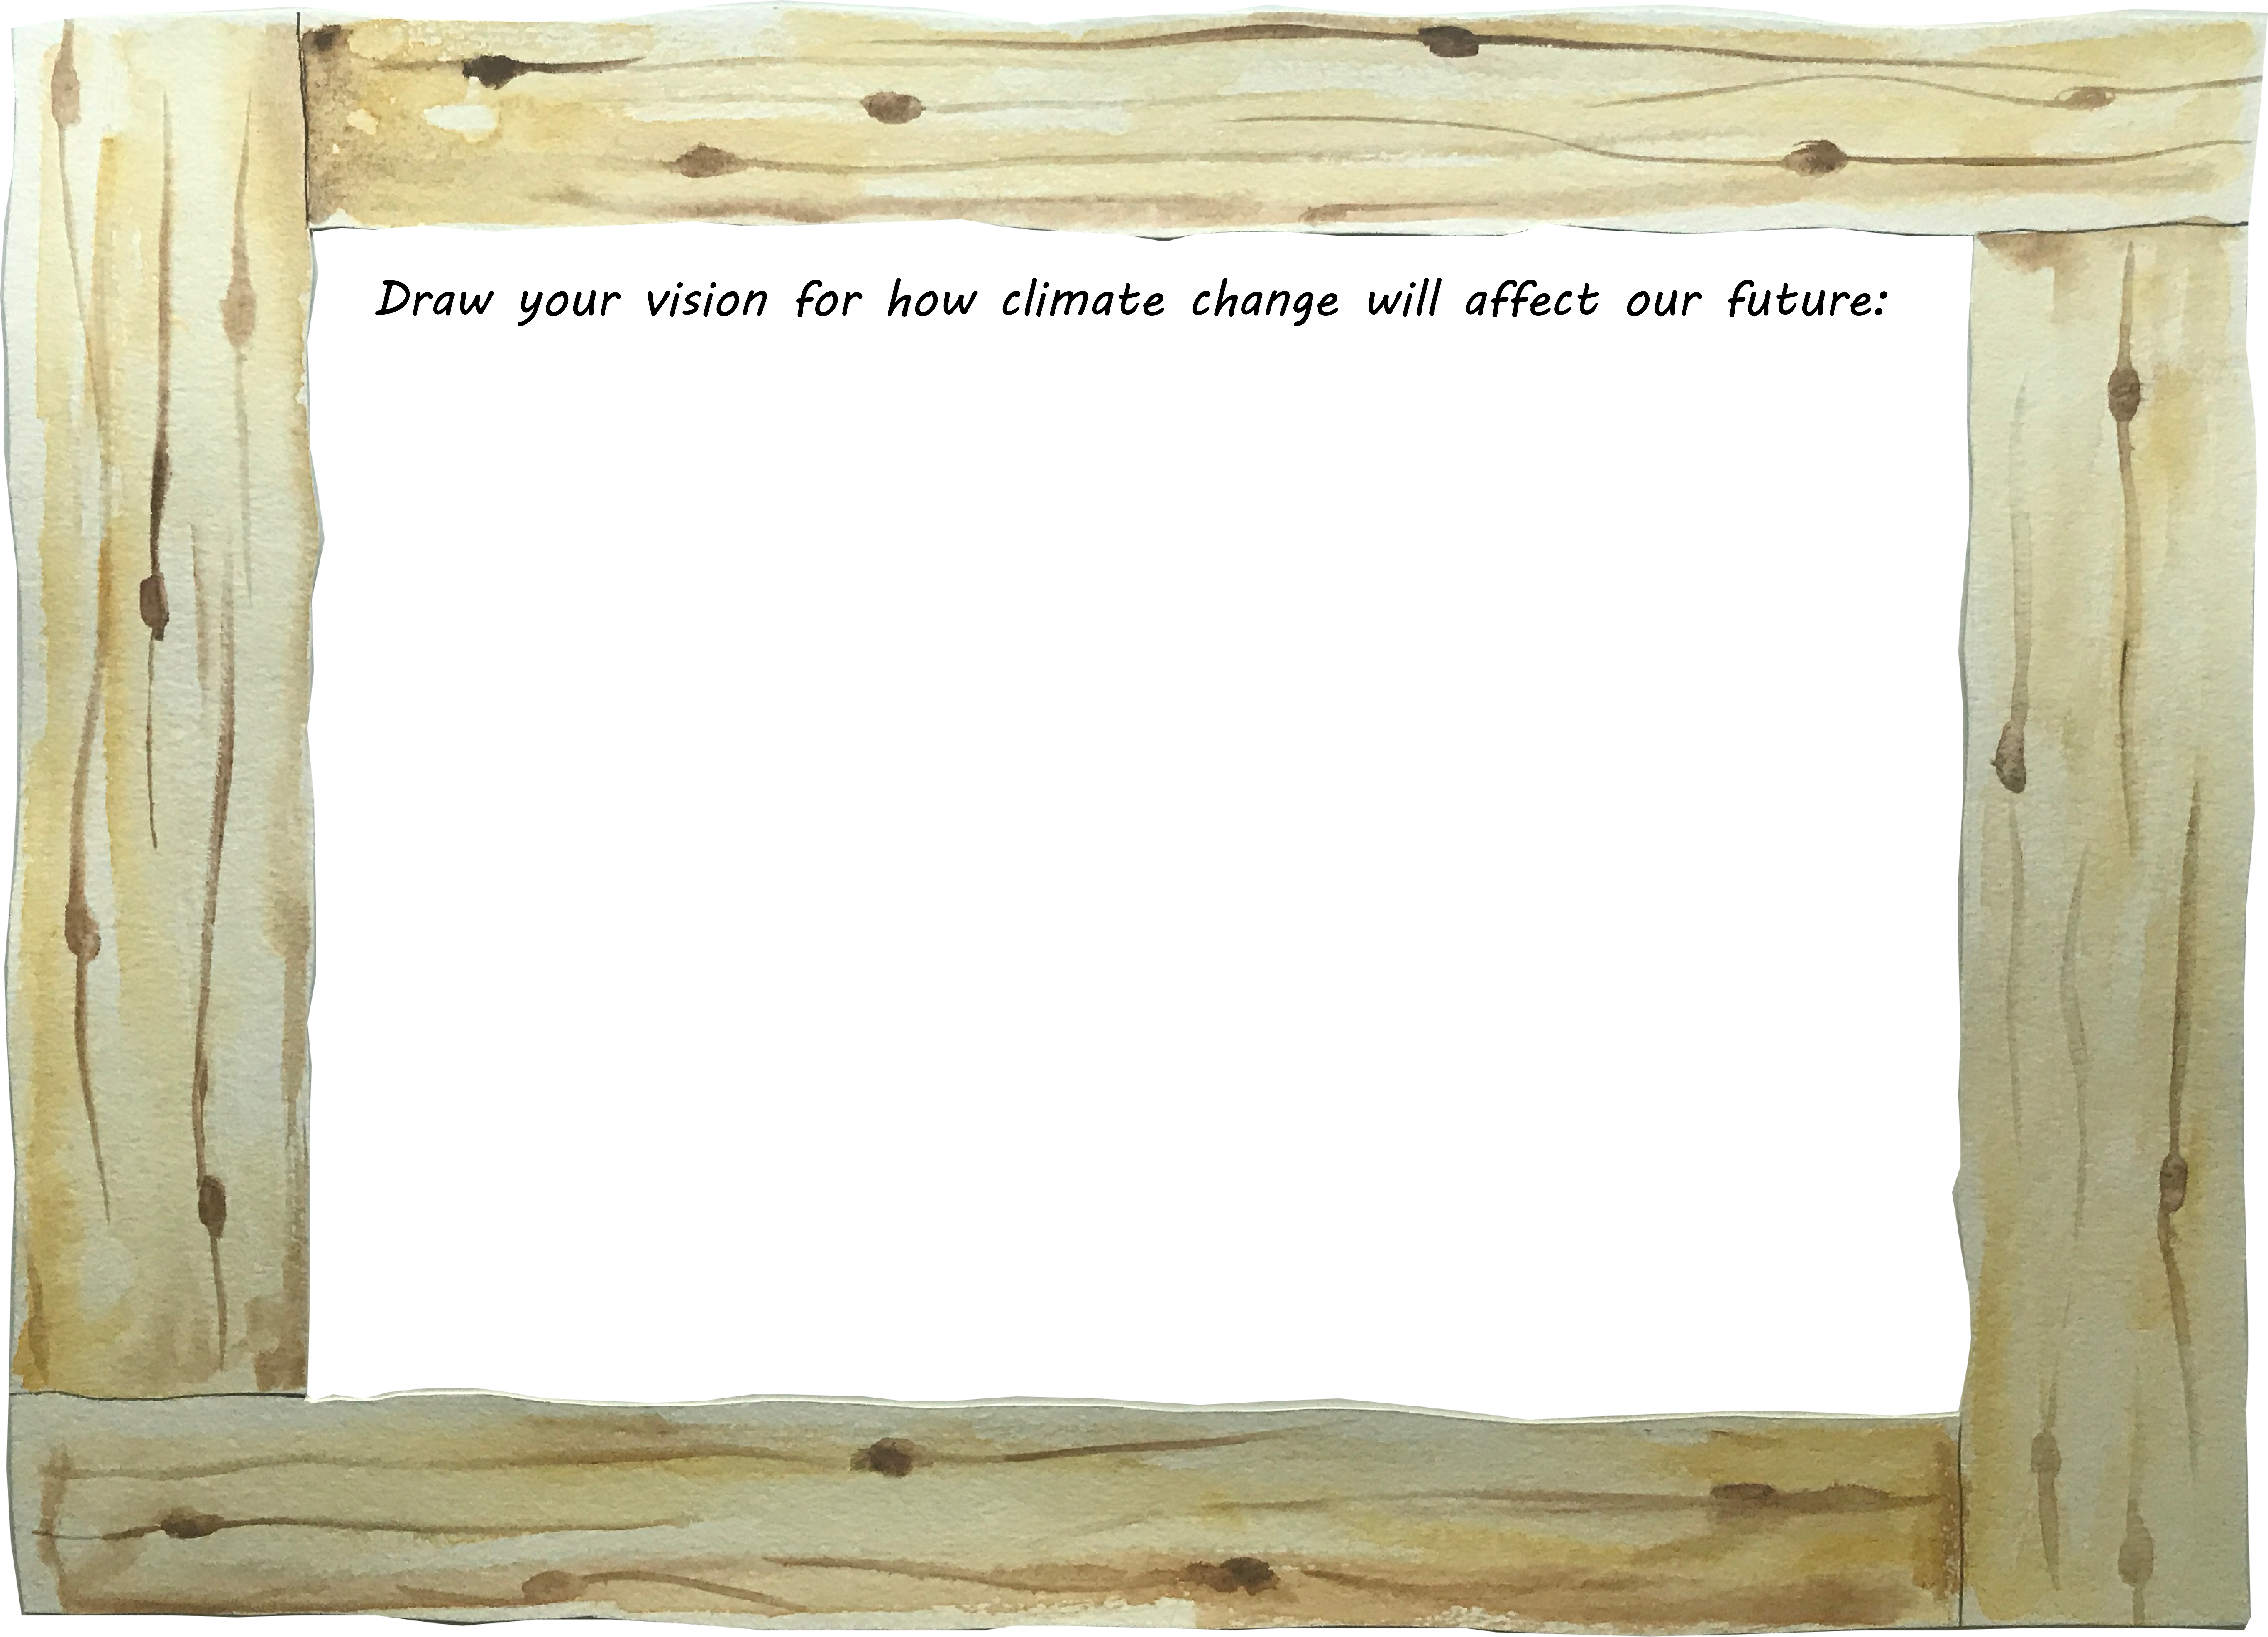 Blank page with a wooden frame painted around the edge in watercolor. Inside the frame is the text "Draw your vision for how climate change will affect our future"